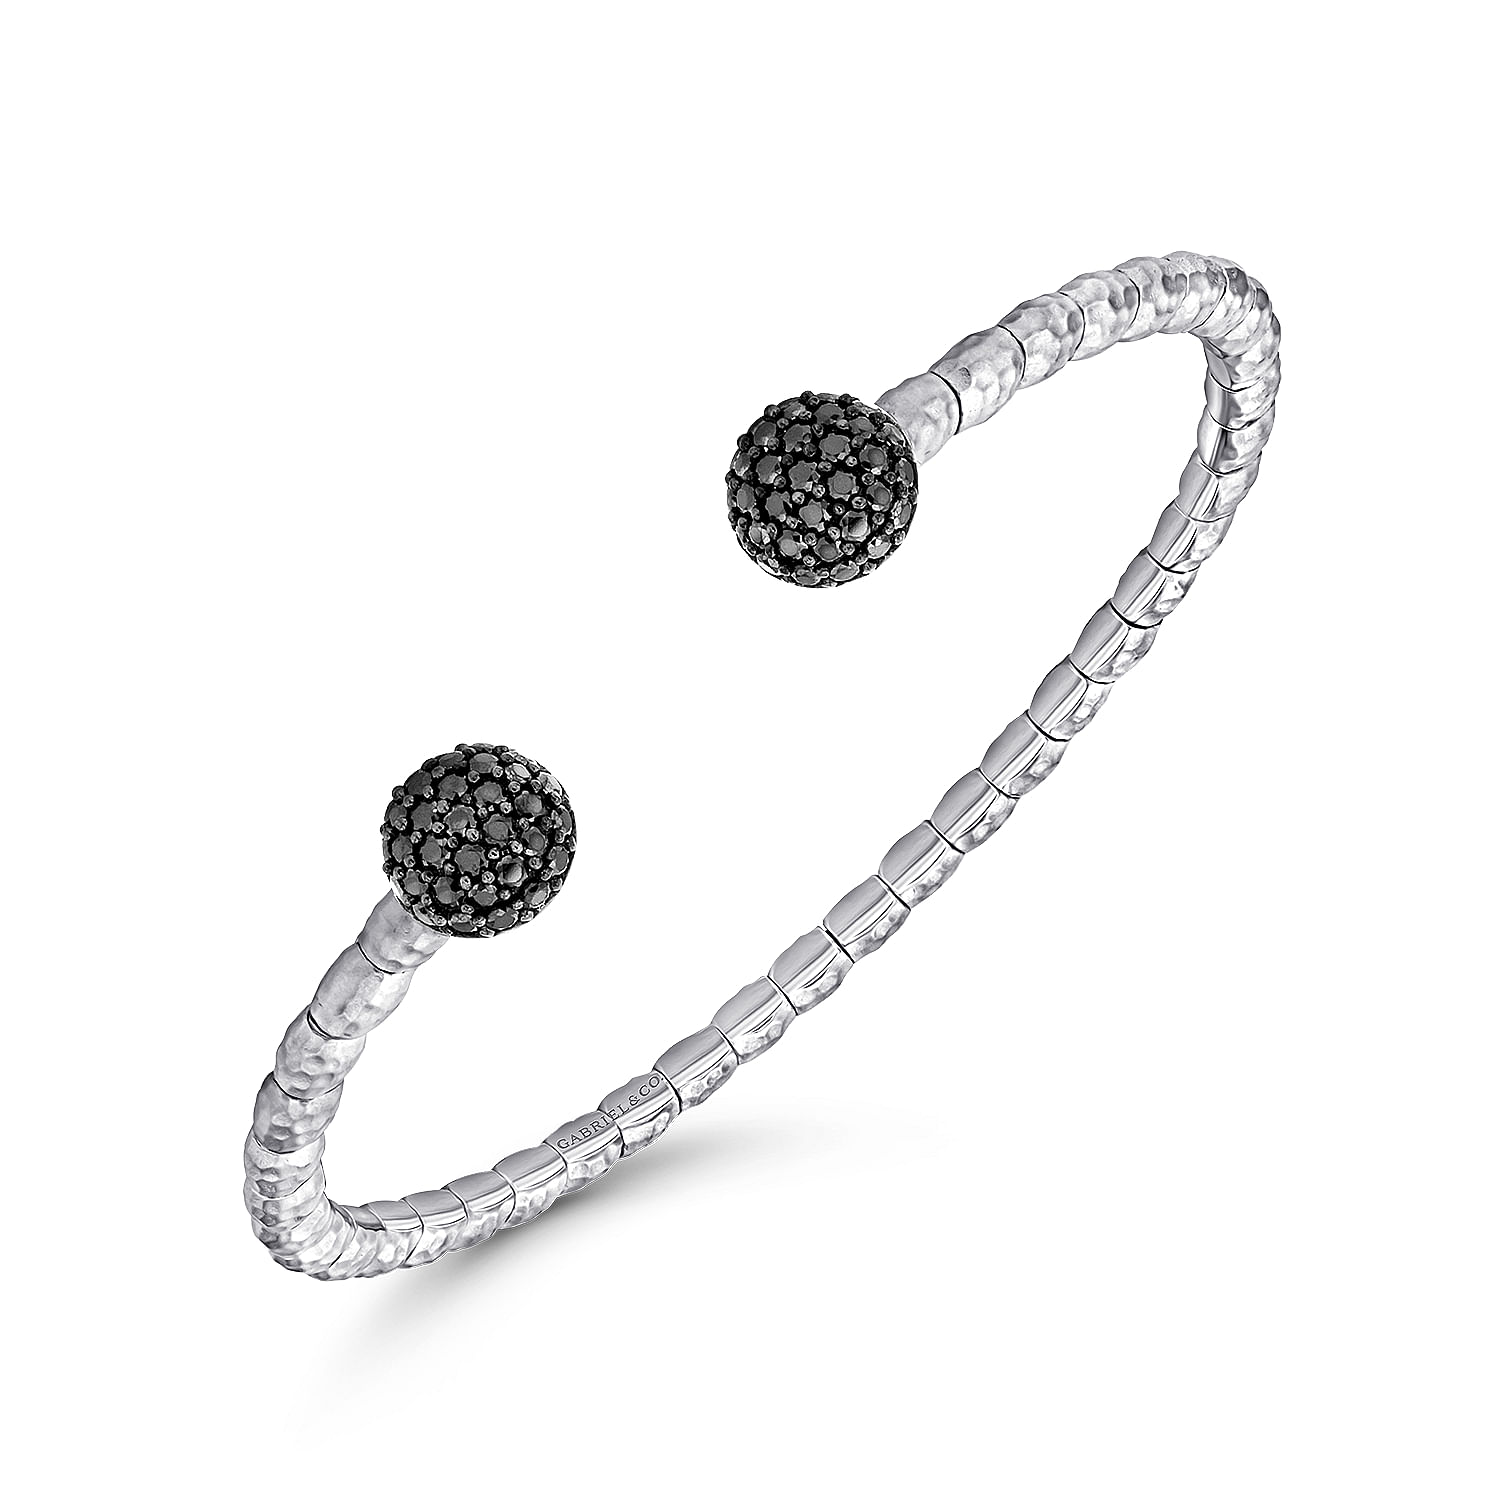 925 Silver and Stainless Steel Black Spinel Pavé Split Bangle